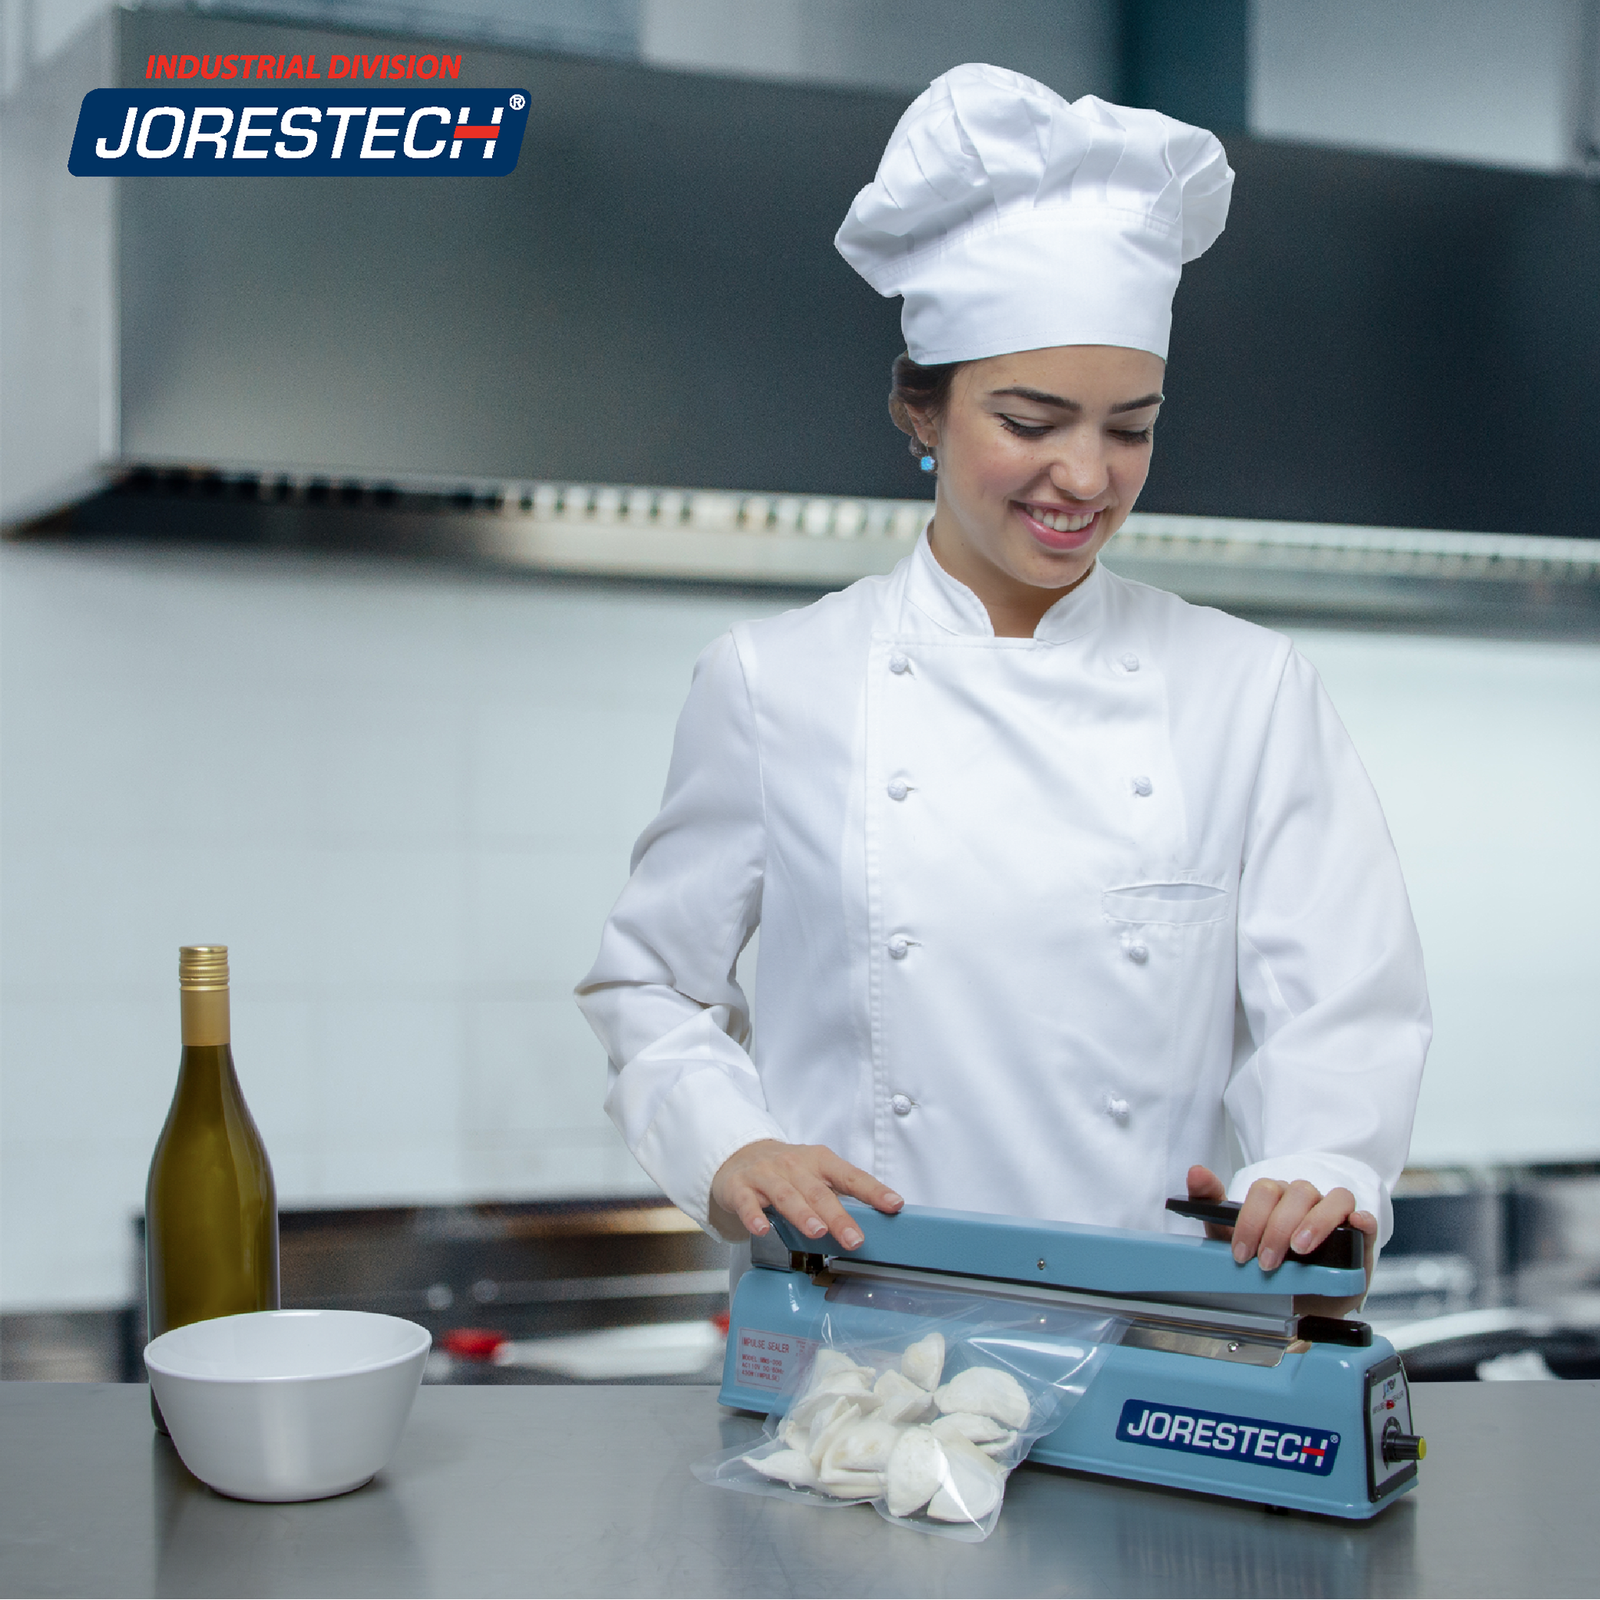 Young chef in an industrial kitchen sealing a sealable bag of dumplings with the JORES TECHNOLOGIES® 16 inch manual impulse bag sealer.